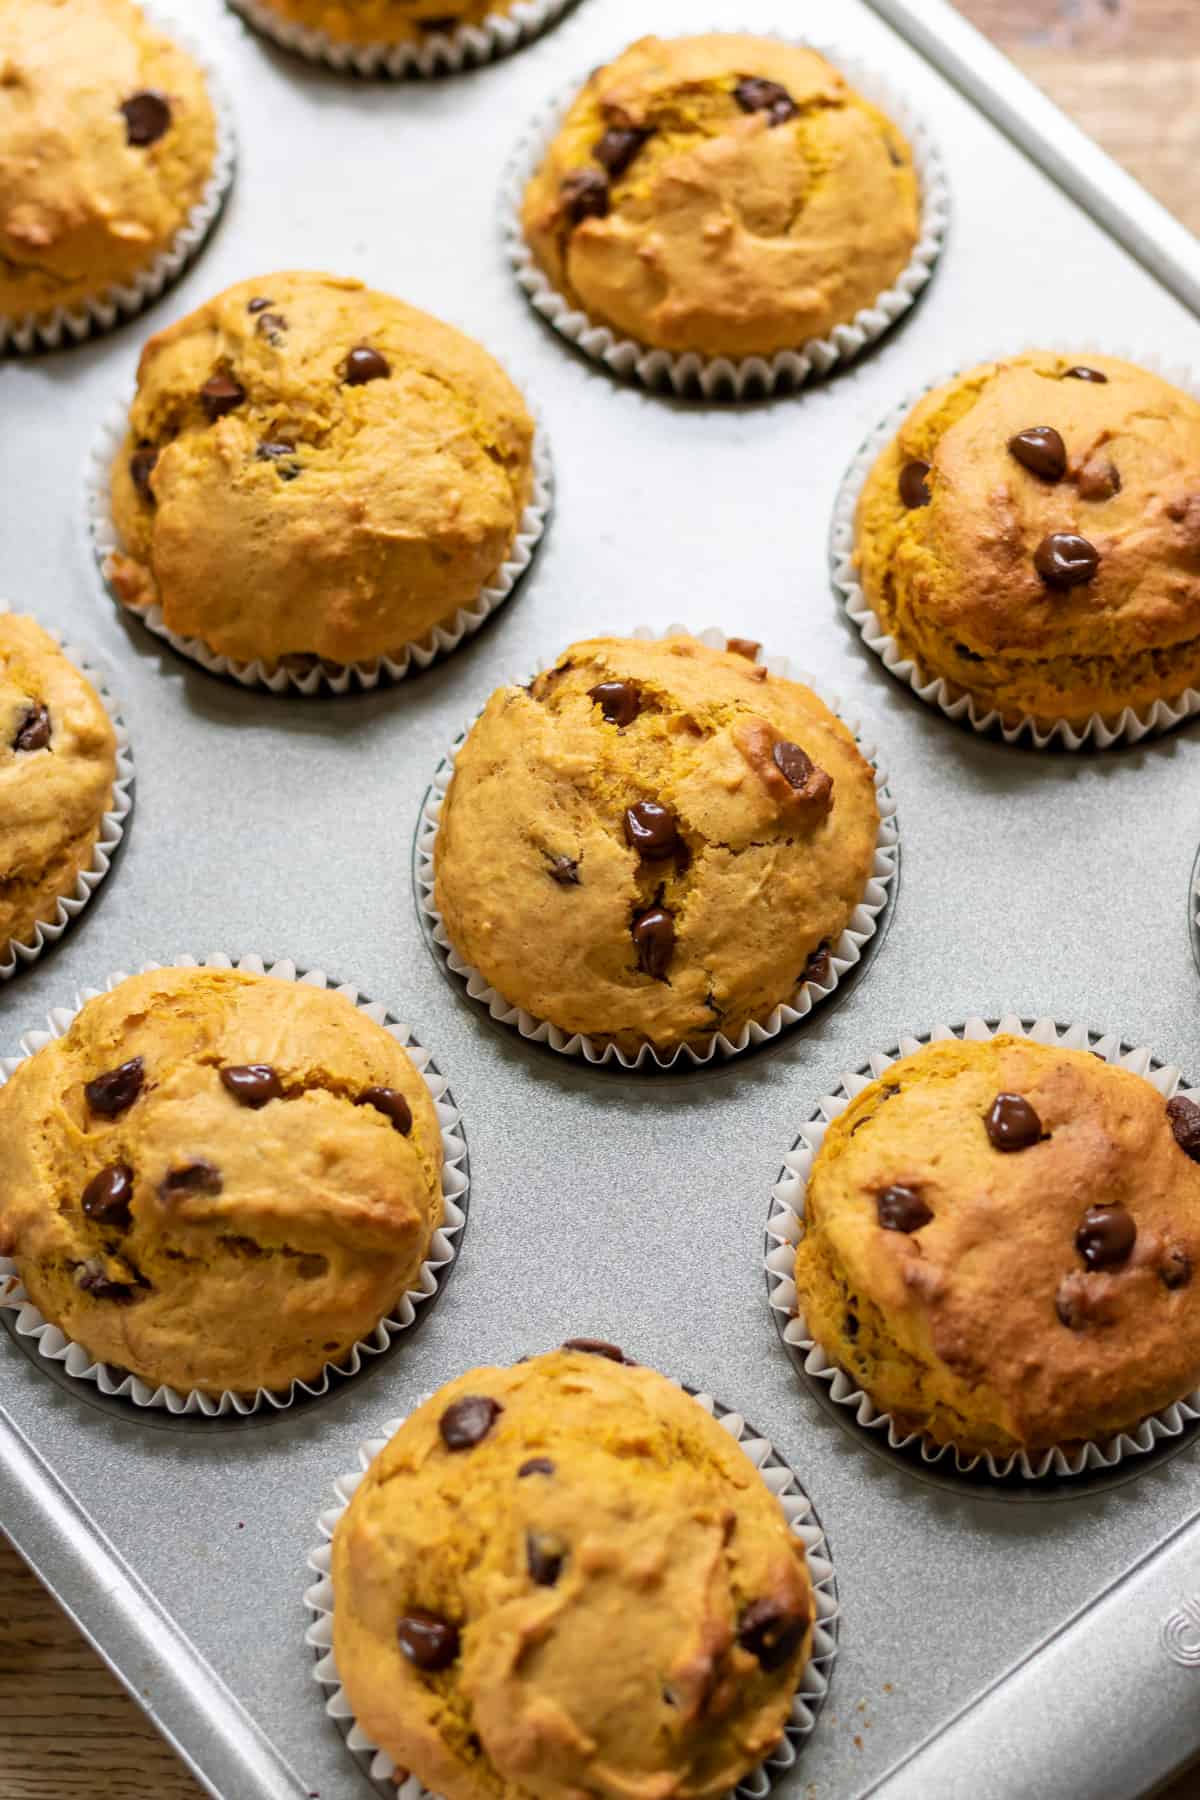 Baked muffins in a muffin pan.